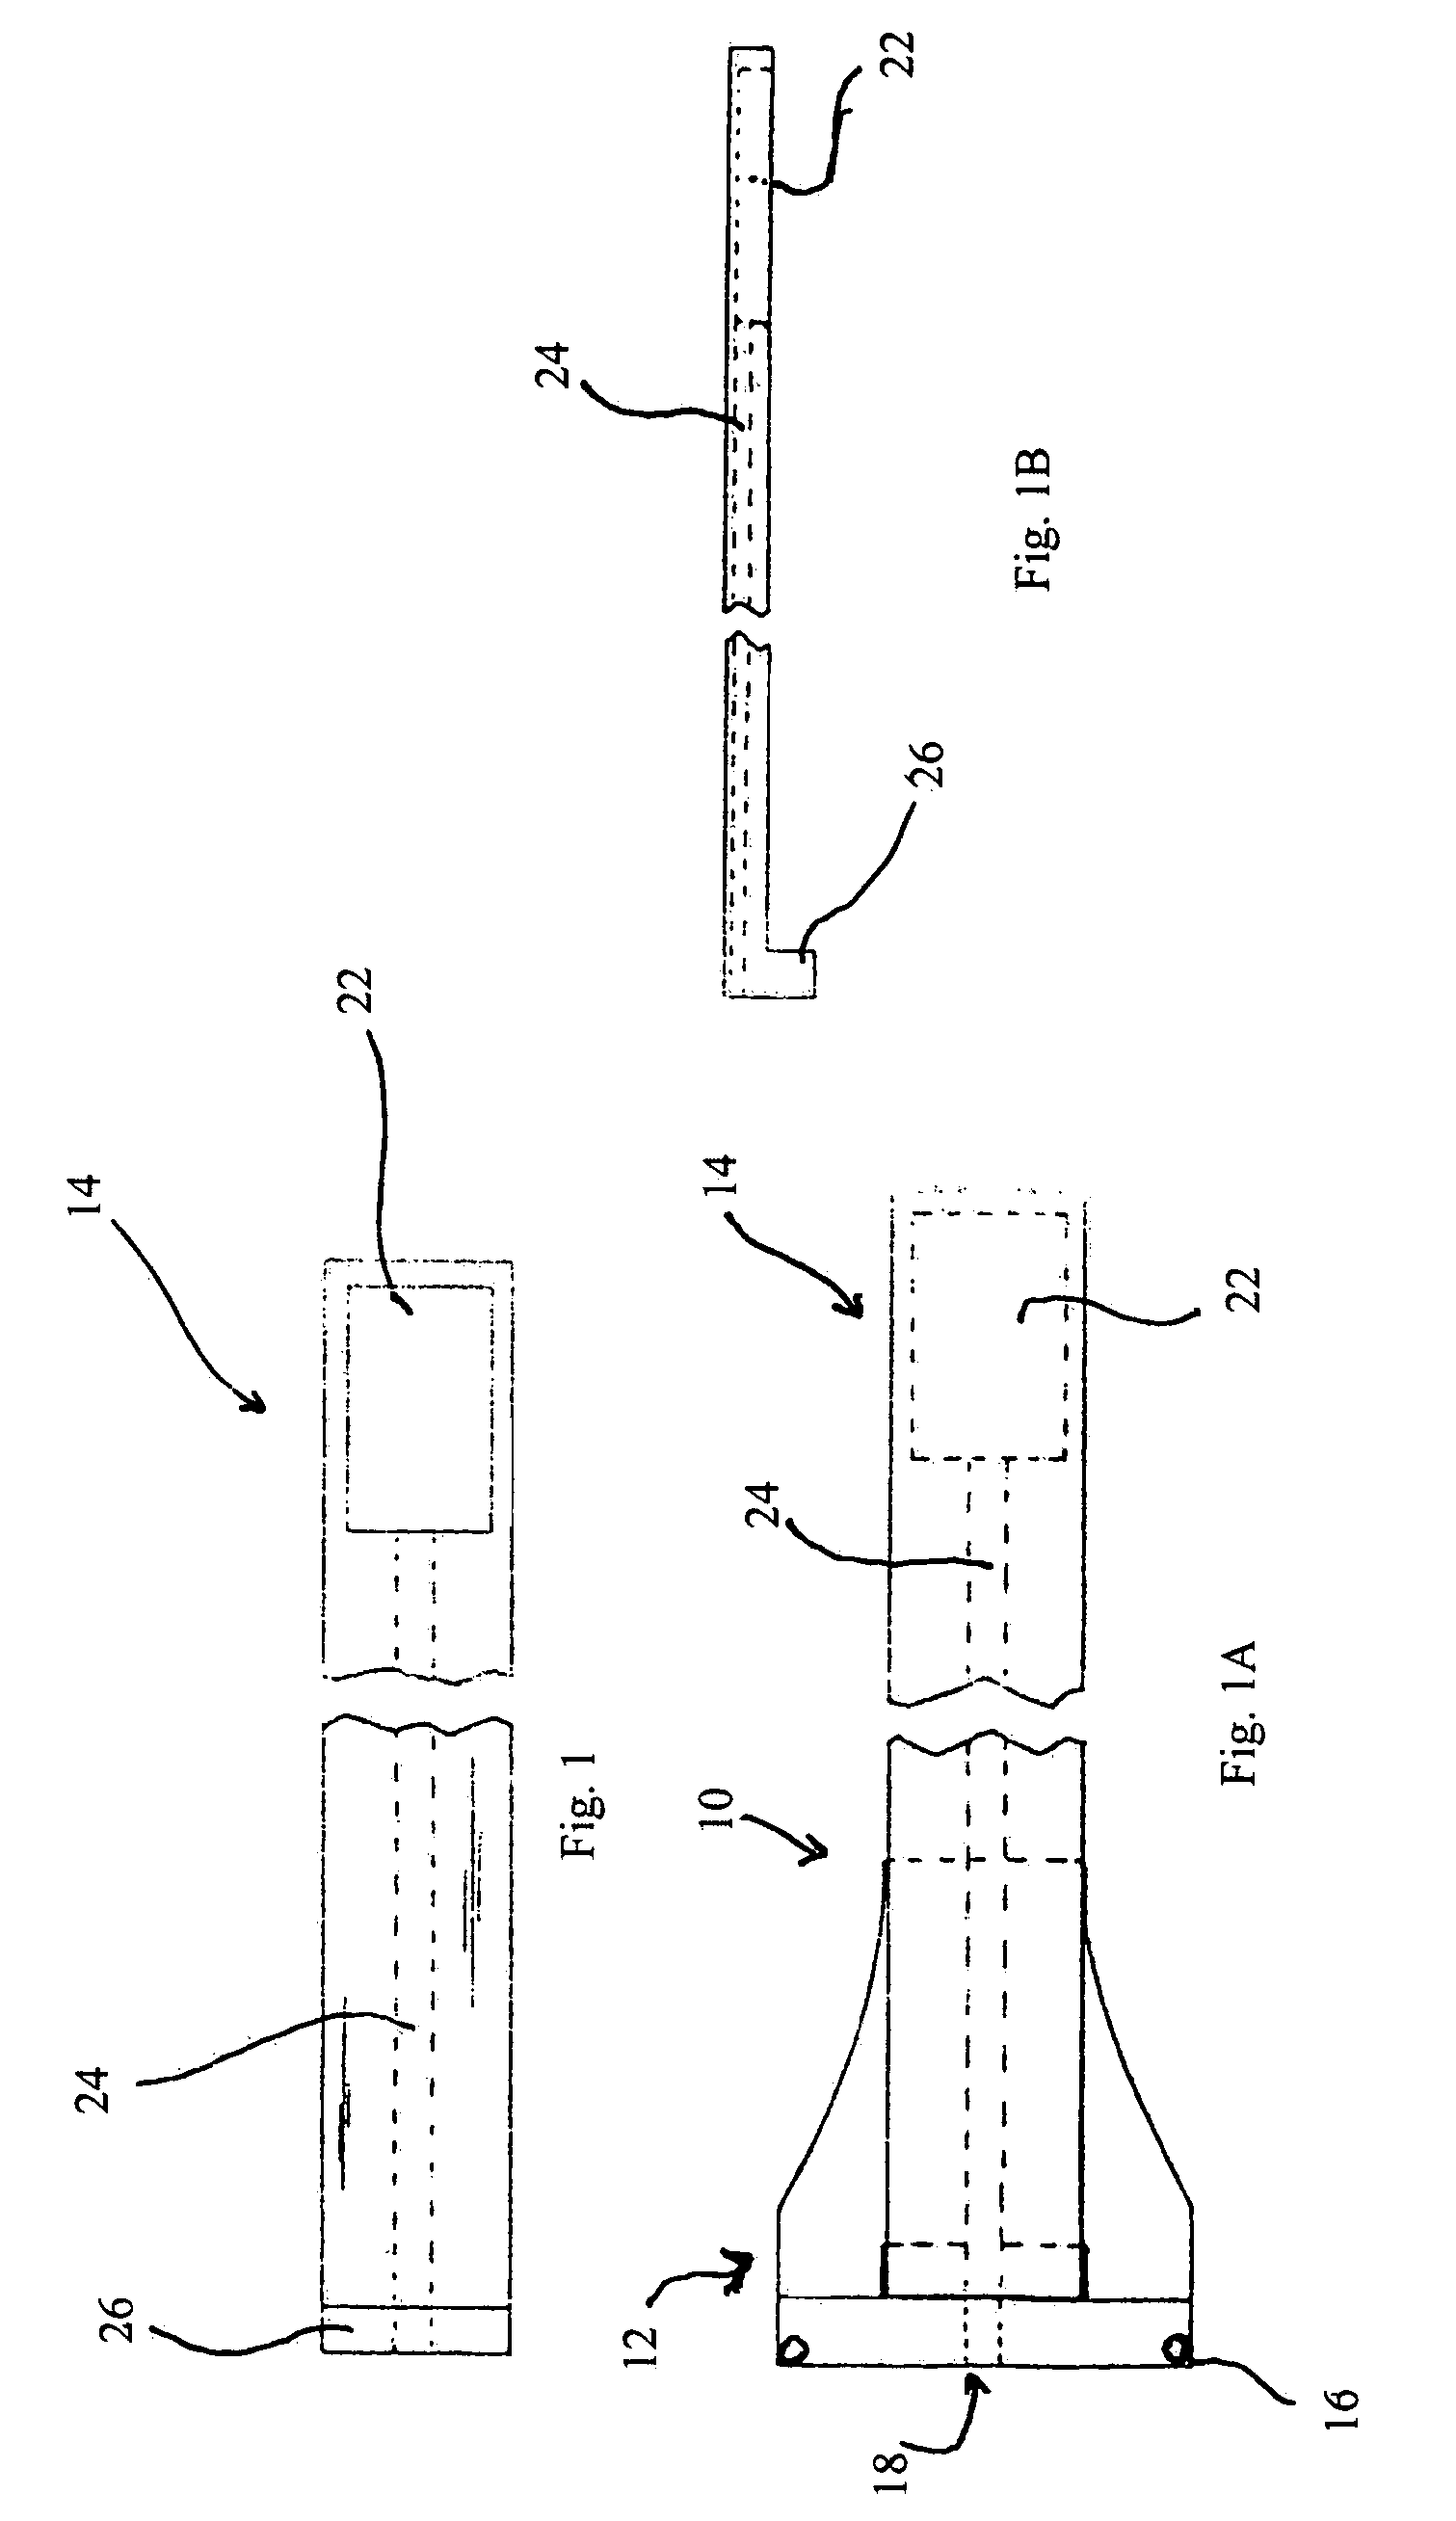 Trans-scleral drug delivery method and apparatus